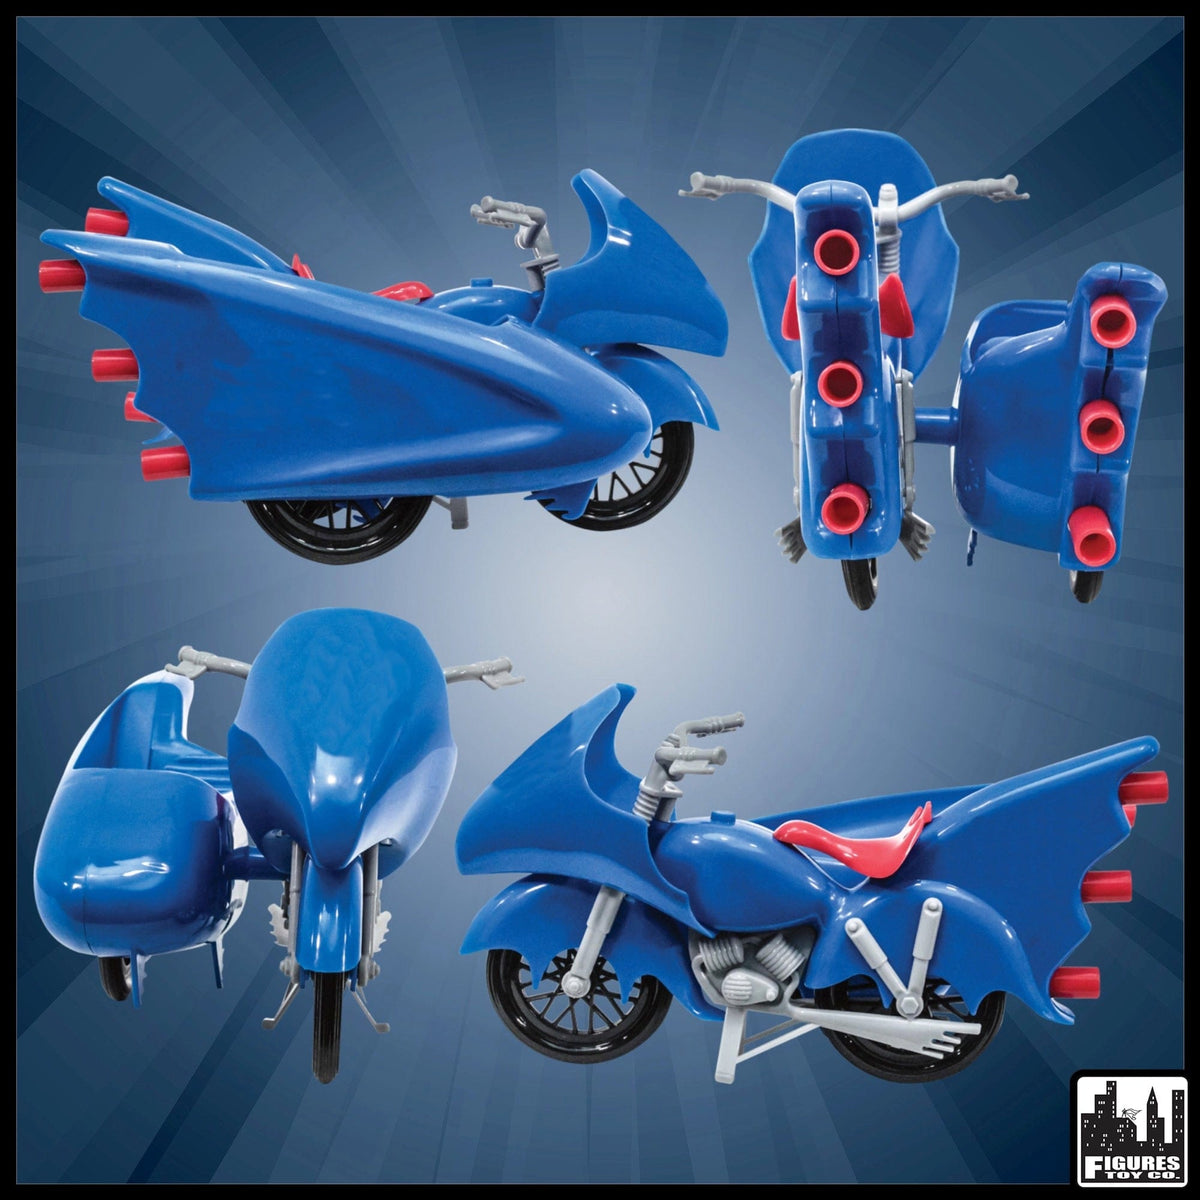 Blue Motorcycle With Sidecar for 6-8 Inch Action Figures